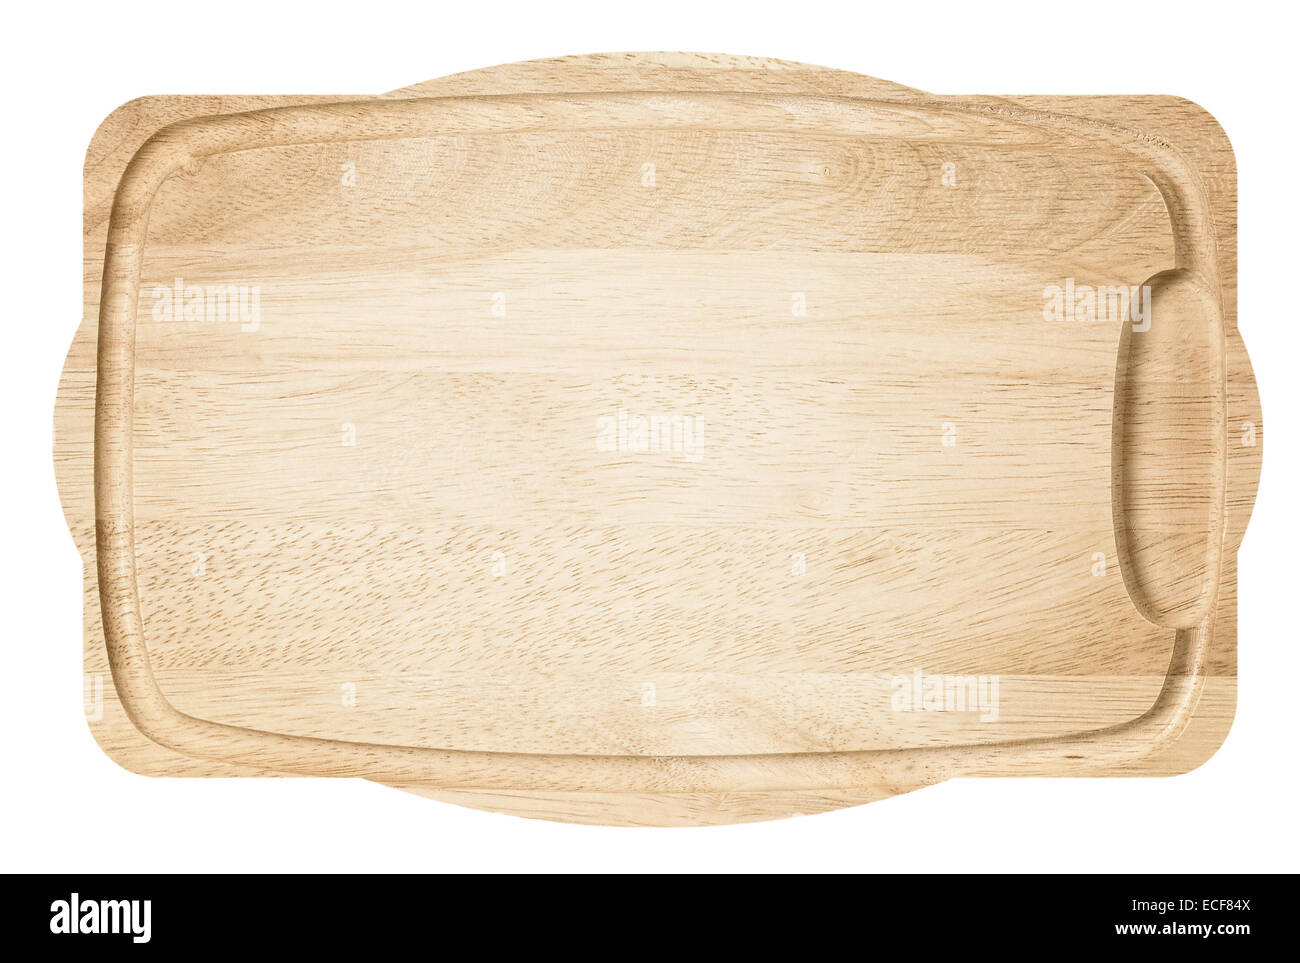 Brown light wooden cutting board. Stock Photo